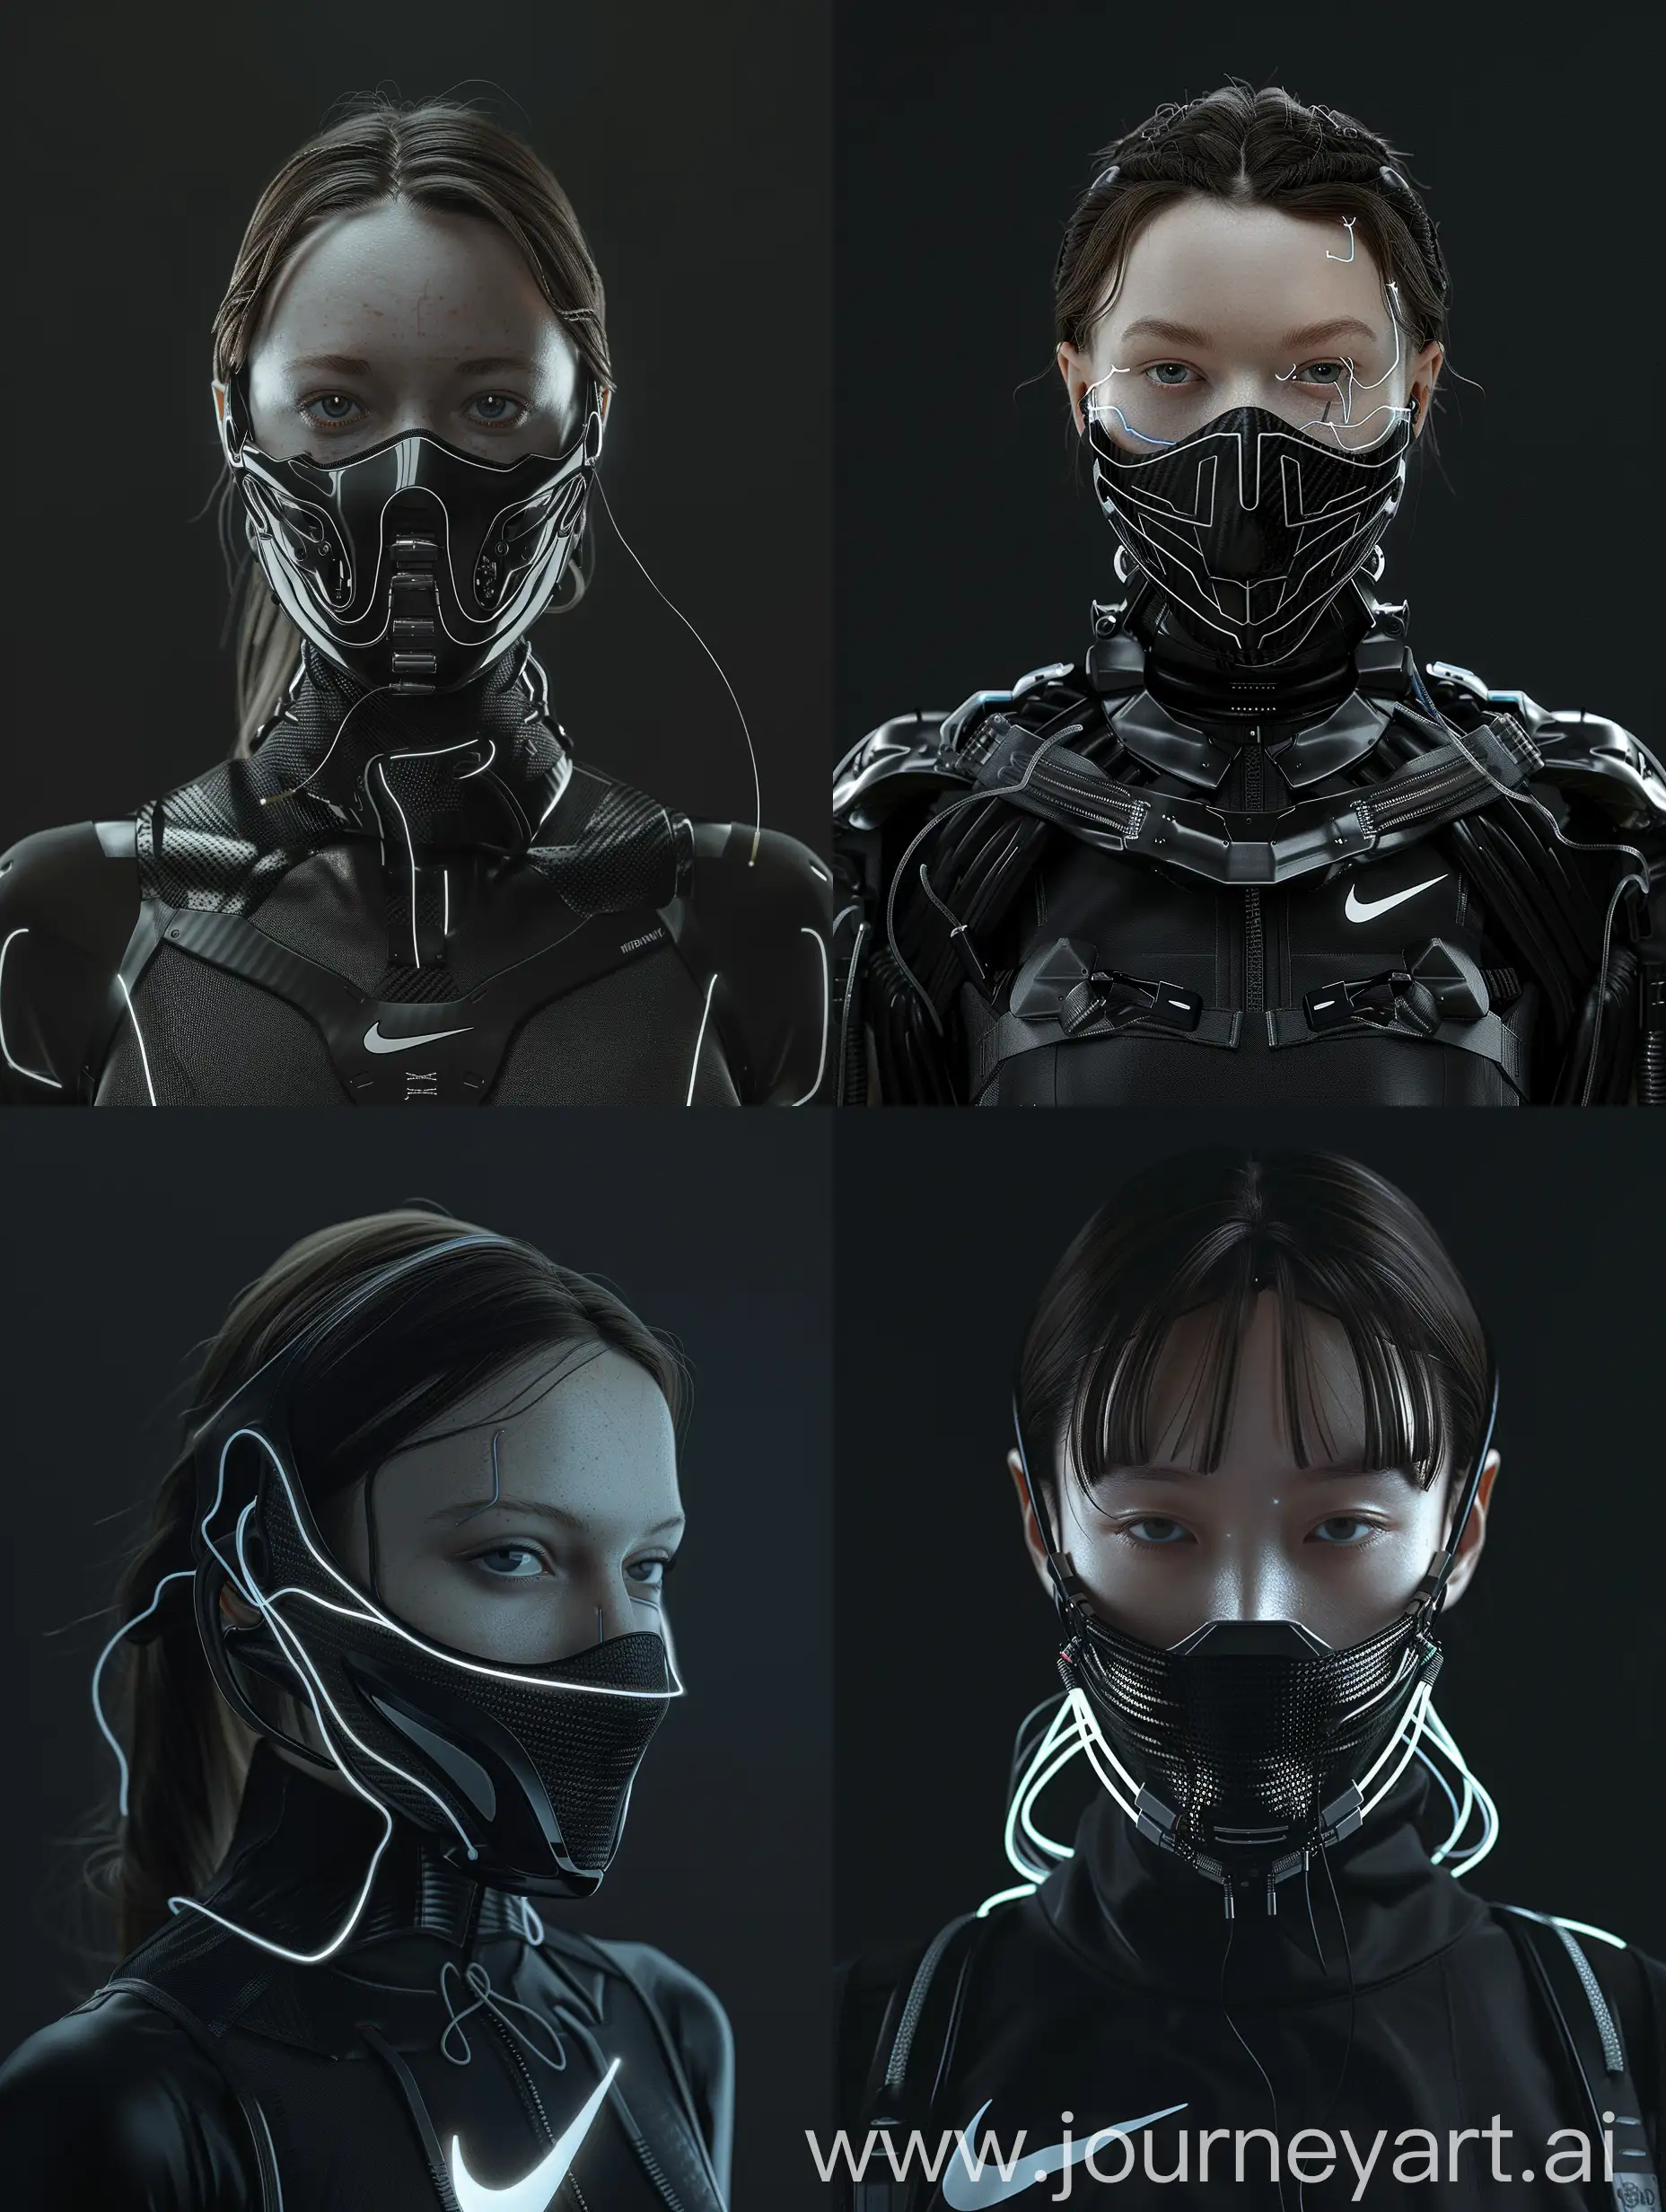 "Explore the future of fashion on MIDJOURNEY with our stunning character featuring a cybernetic mouth-covering mask. Against a sleek black backdrop, this captivating design seamlessly merges advanced technology with intricate details like carbon fiber textures and sleek aluminum accents and glow wires. Symbolizing the perfect harmony between humanity and machine, our character embodies the essence of futuristic cyberpunk style. Enhanced with Nike-inspired add-ons and presented without any distracting blur, her irresistible allure is sure to captivate your imagination."